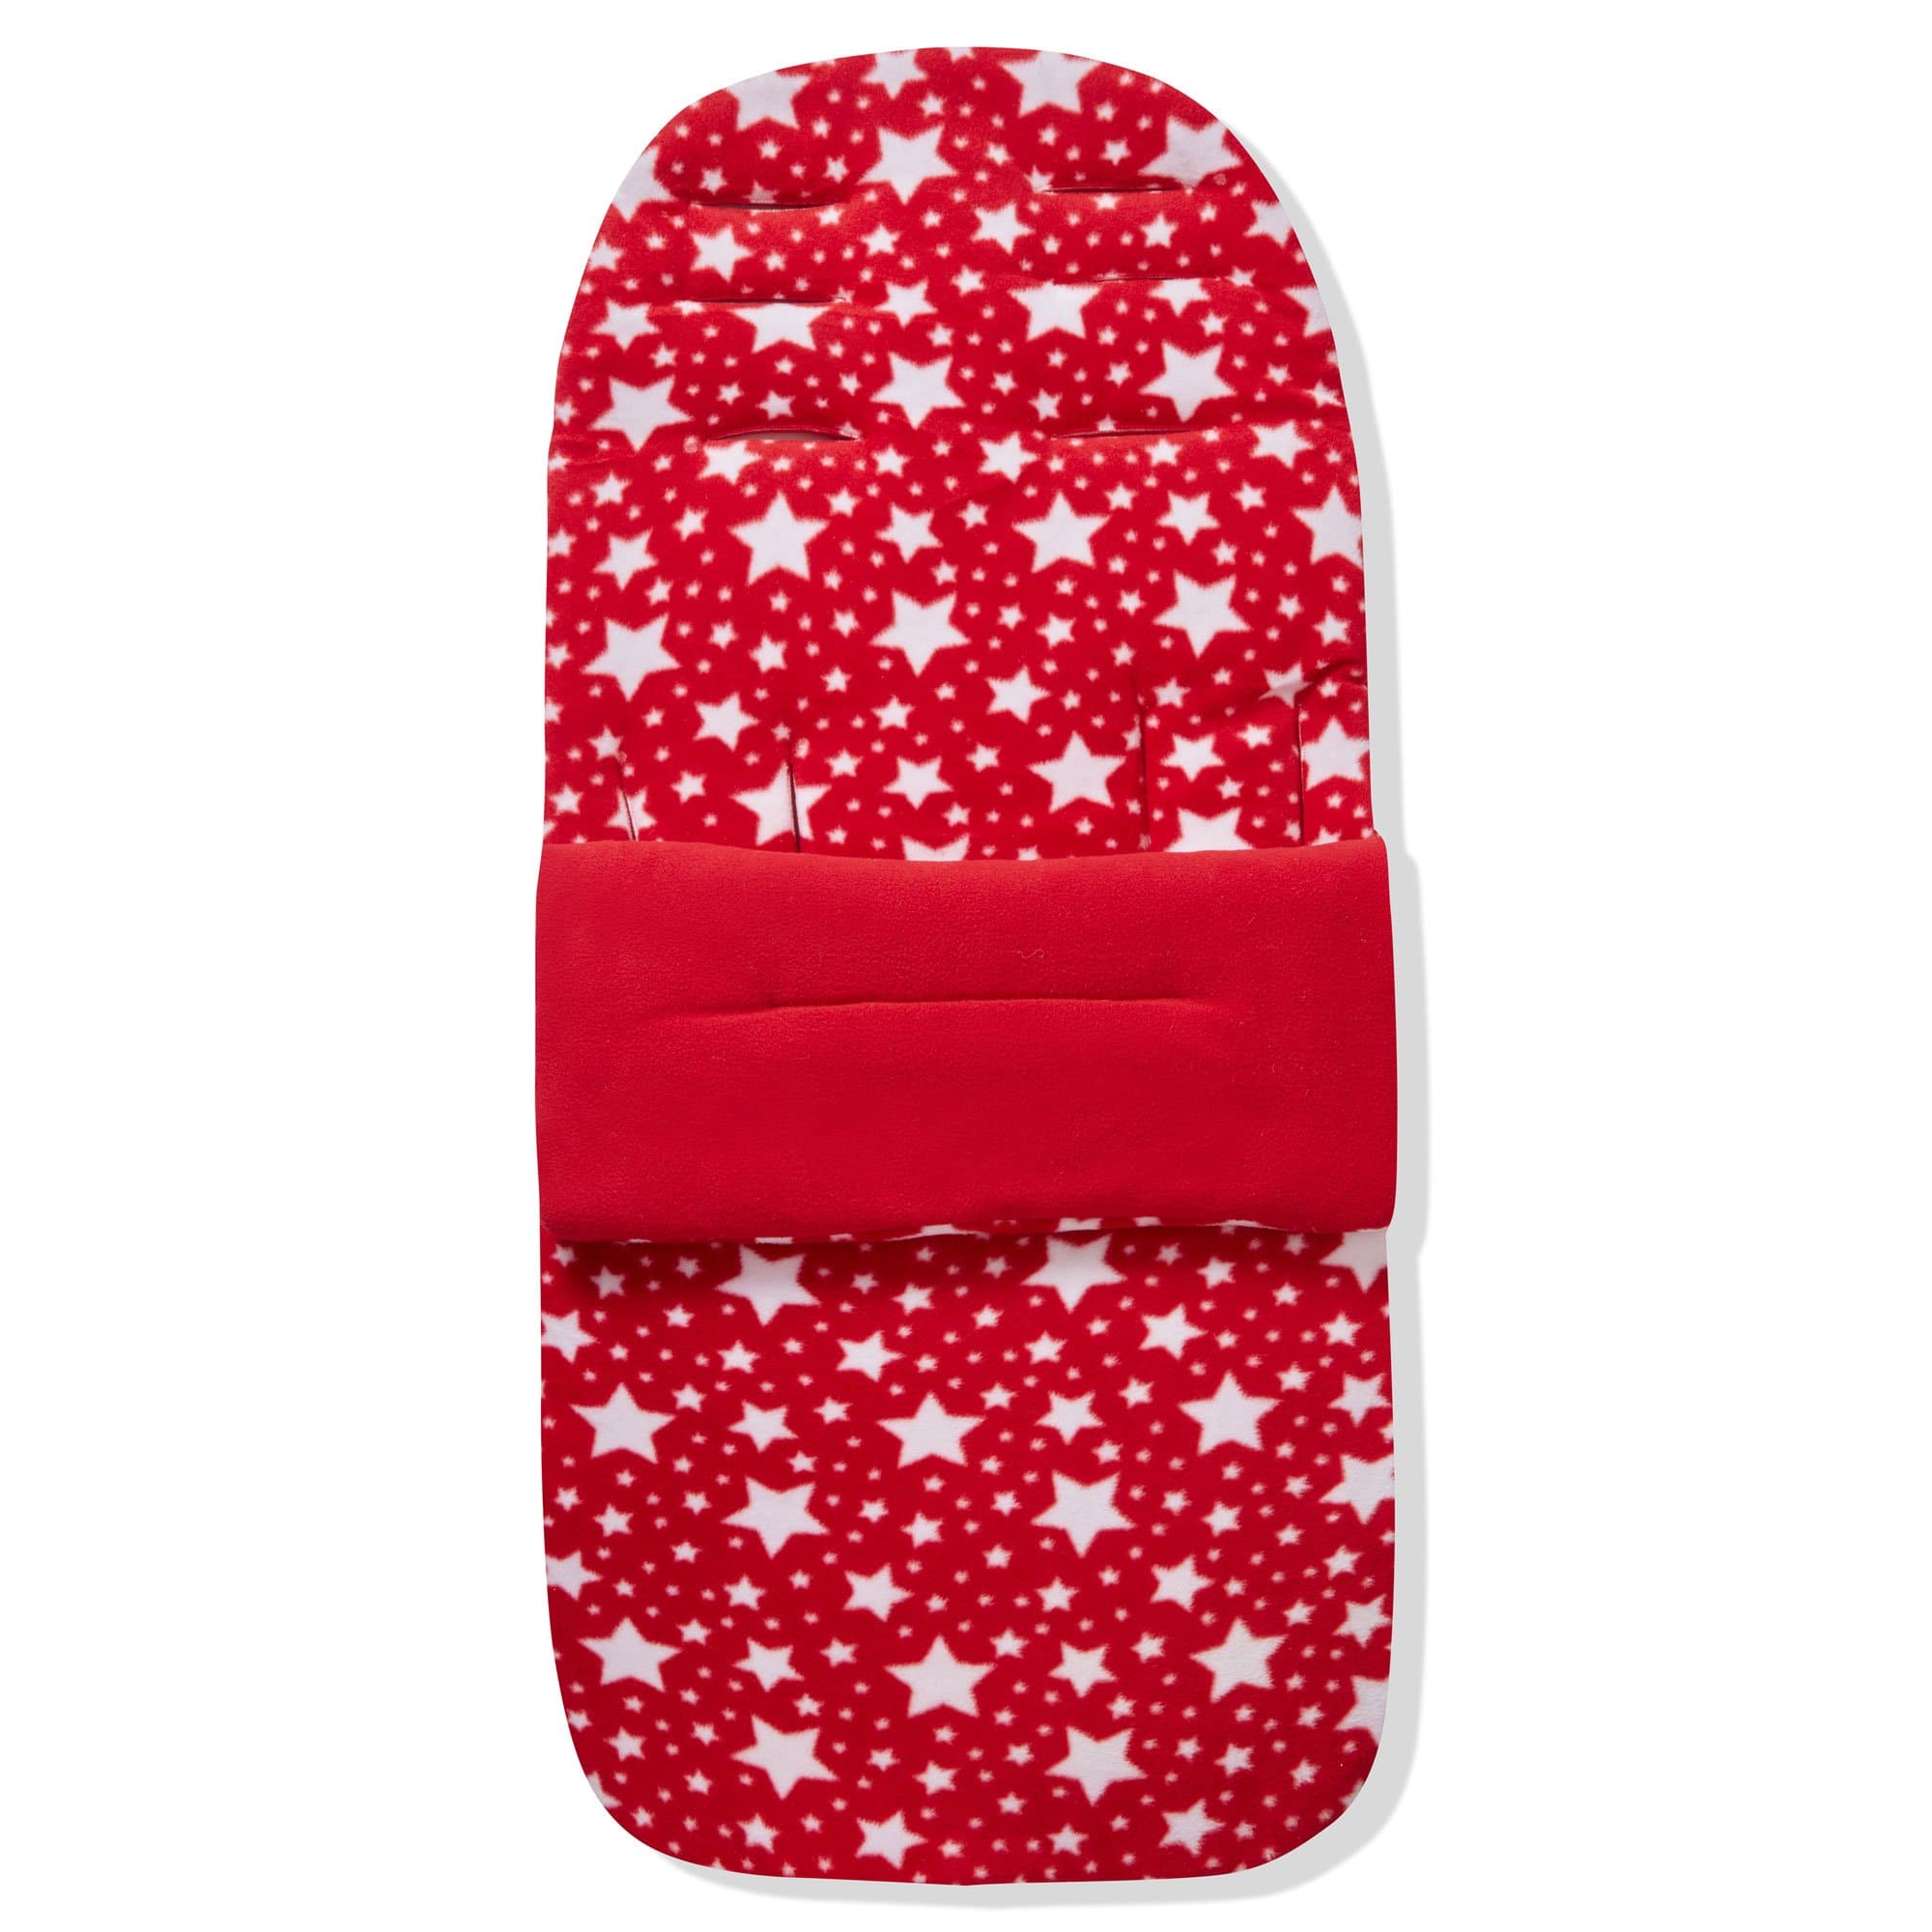 Fleece Footmuff / Cosy Toes Compatible with My Babiie - Red Star / Fits All Models | For Your Little One